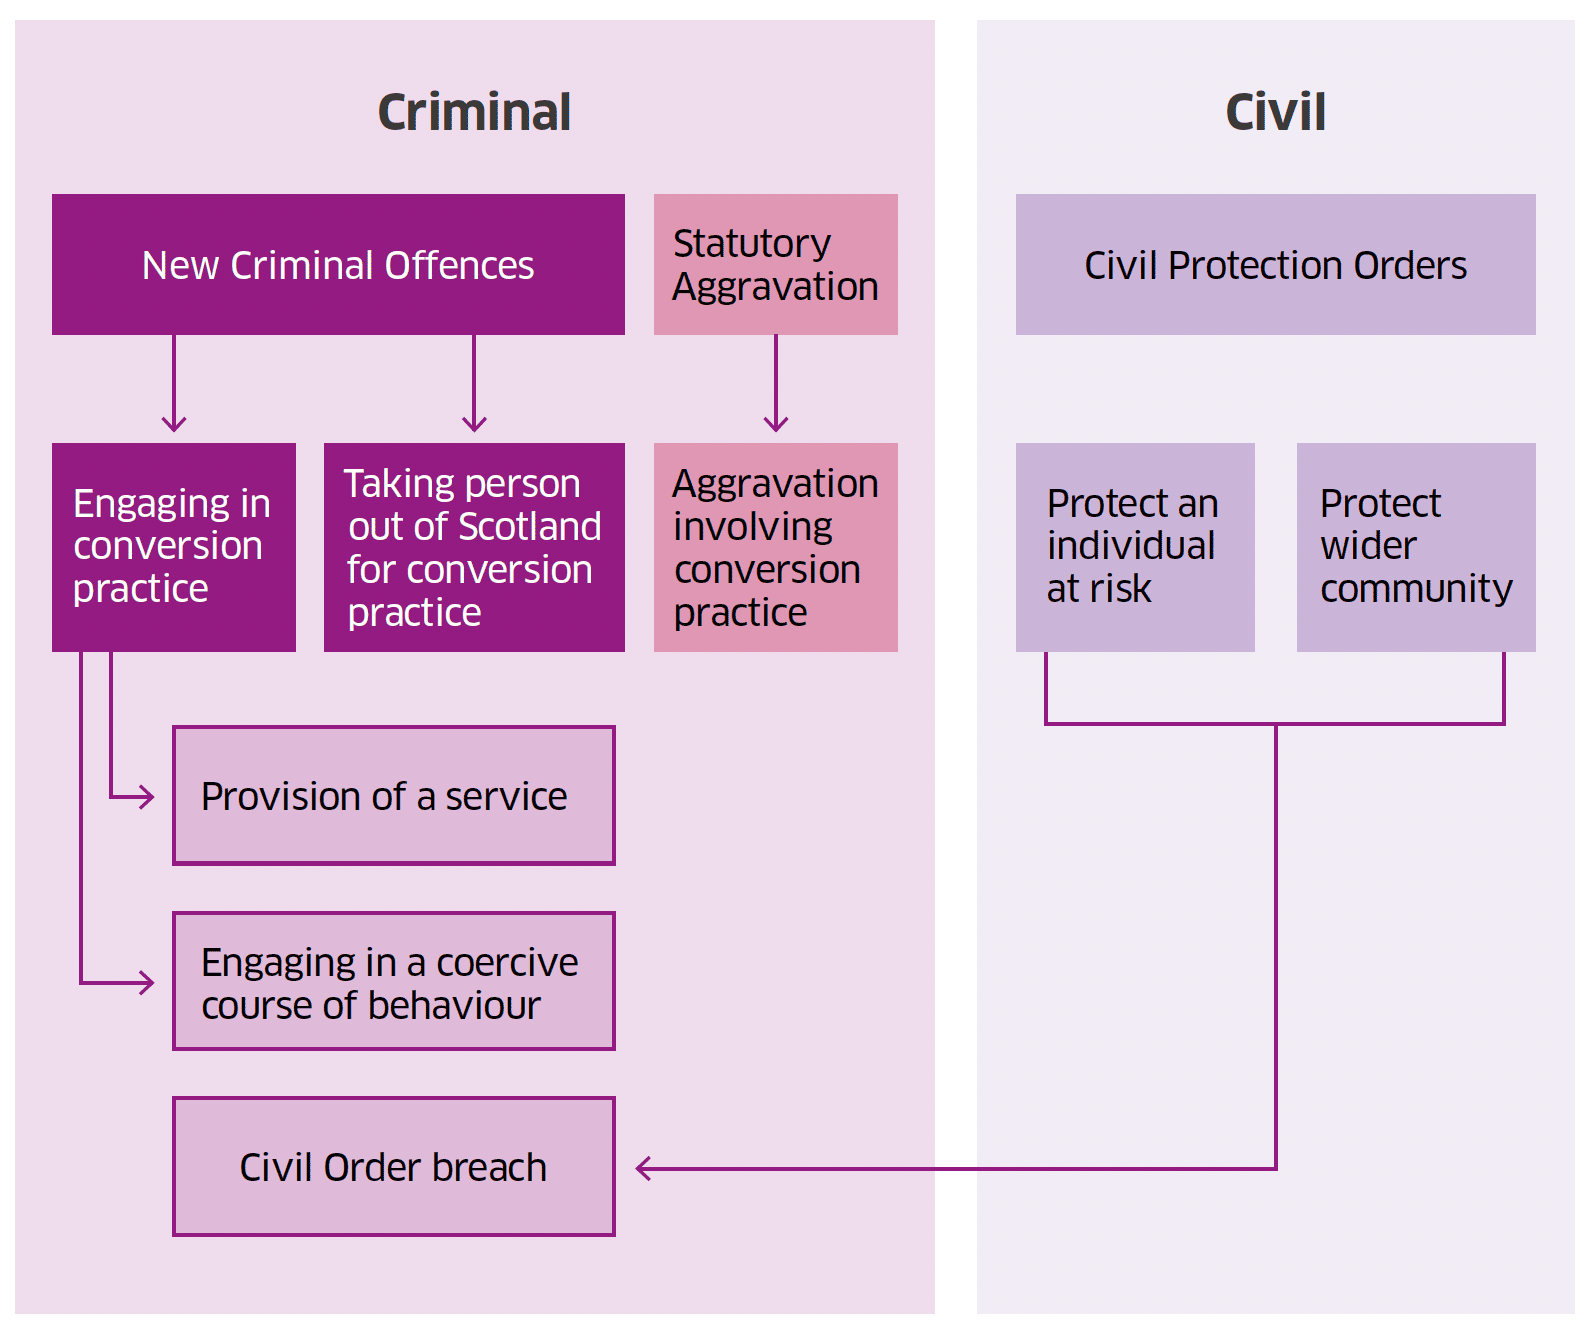 Proposed package of criminal and civil measures and how they work together to prevent and respond to conversion practices in Scotland.